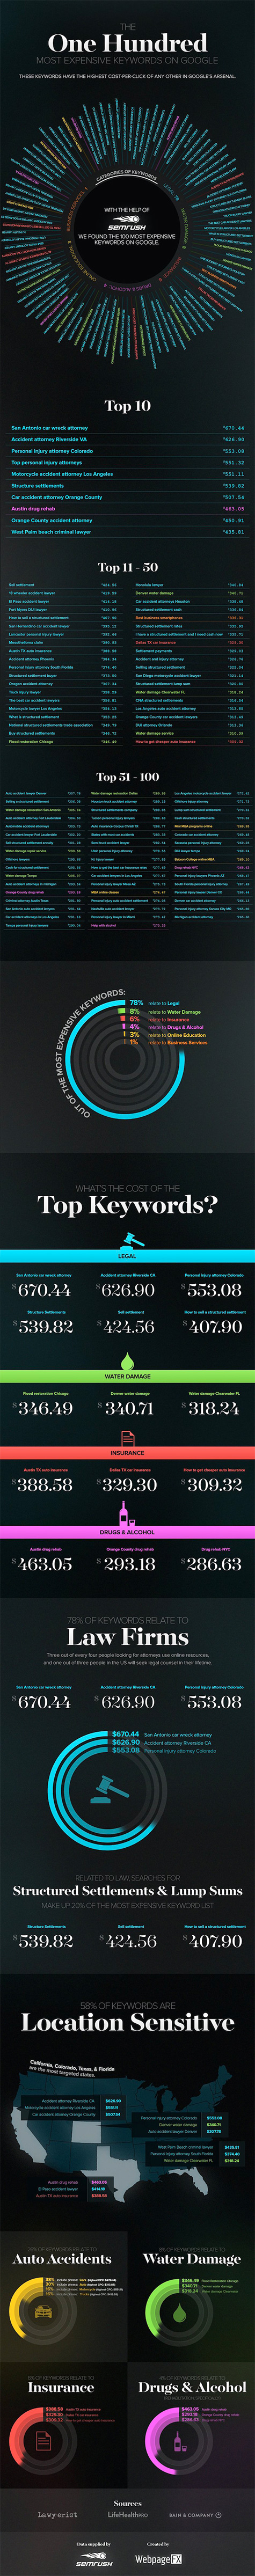 1638 blog most expensive keywords infographic